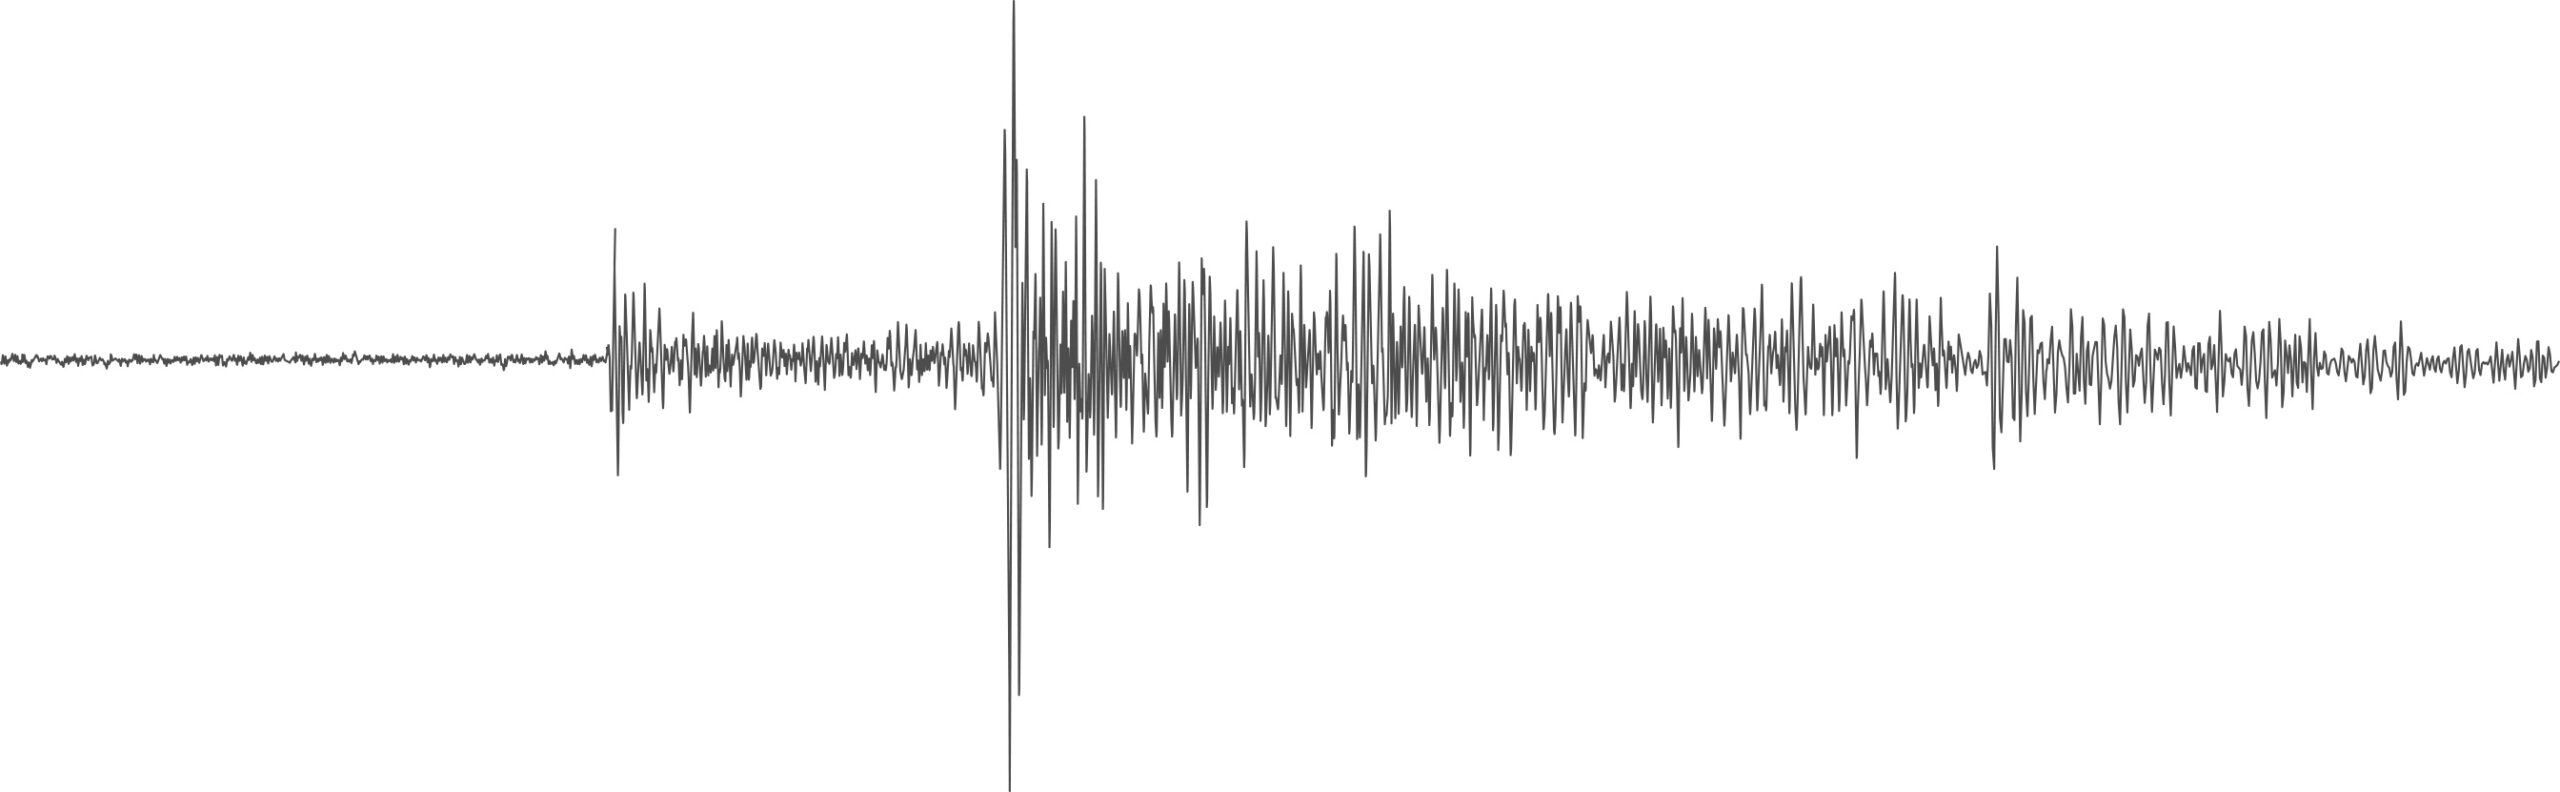 A seismogram readout from Mars.